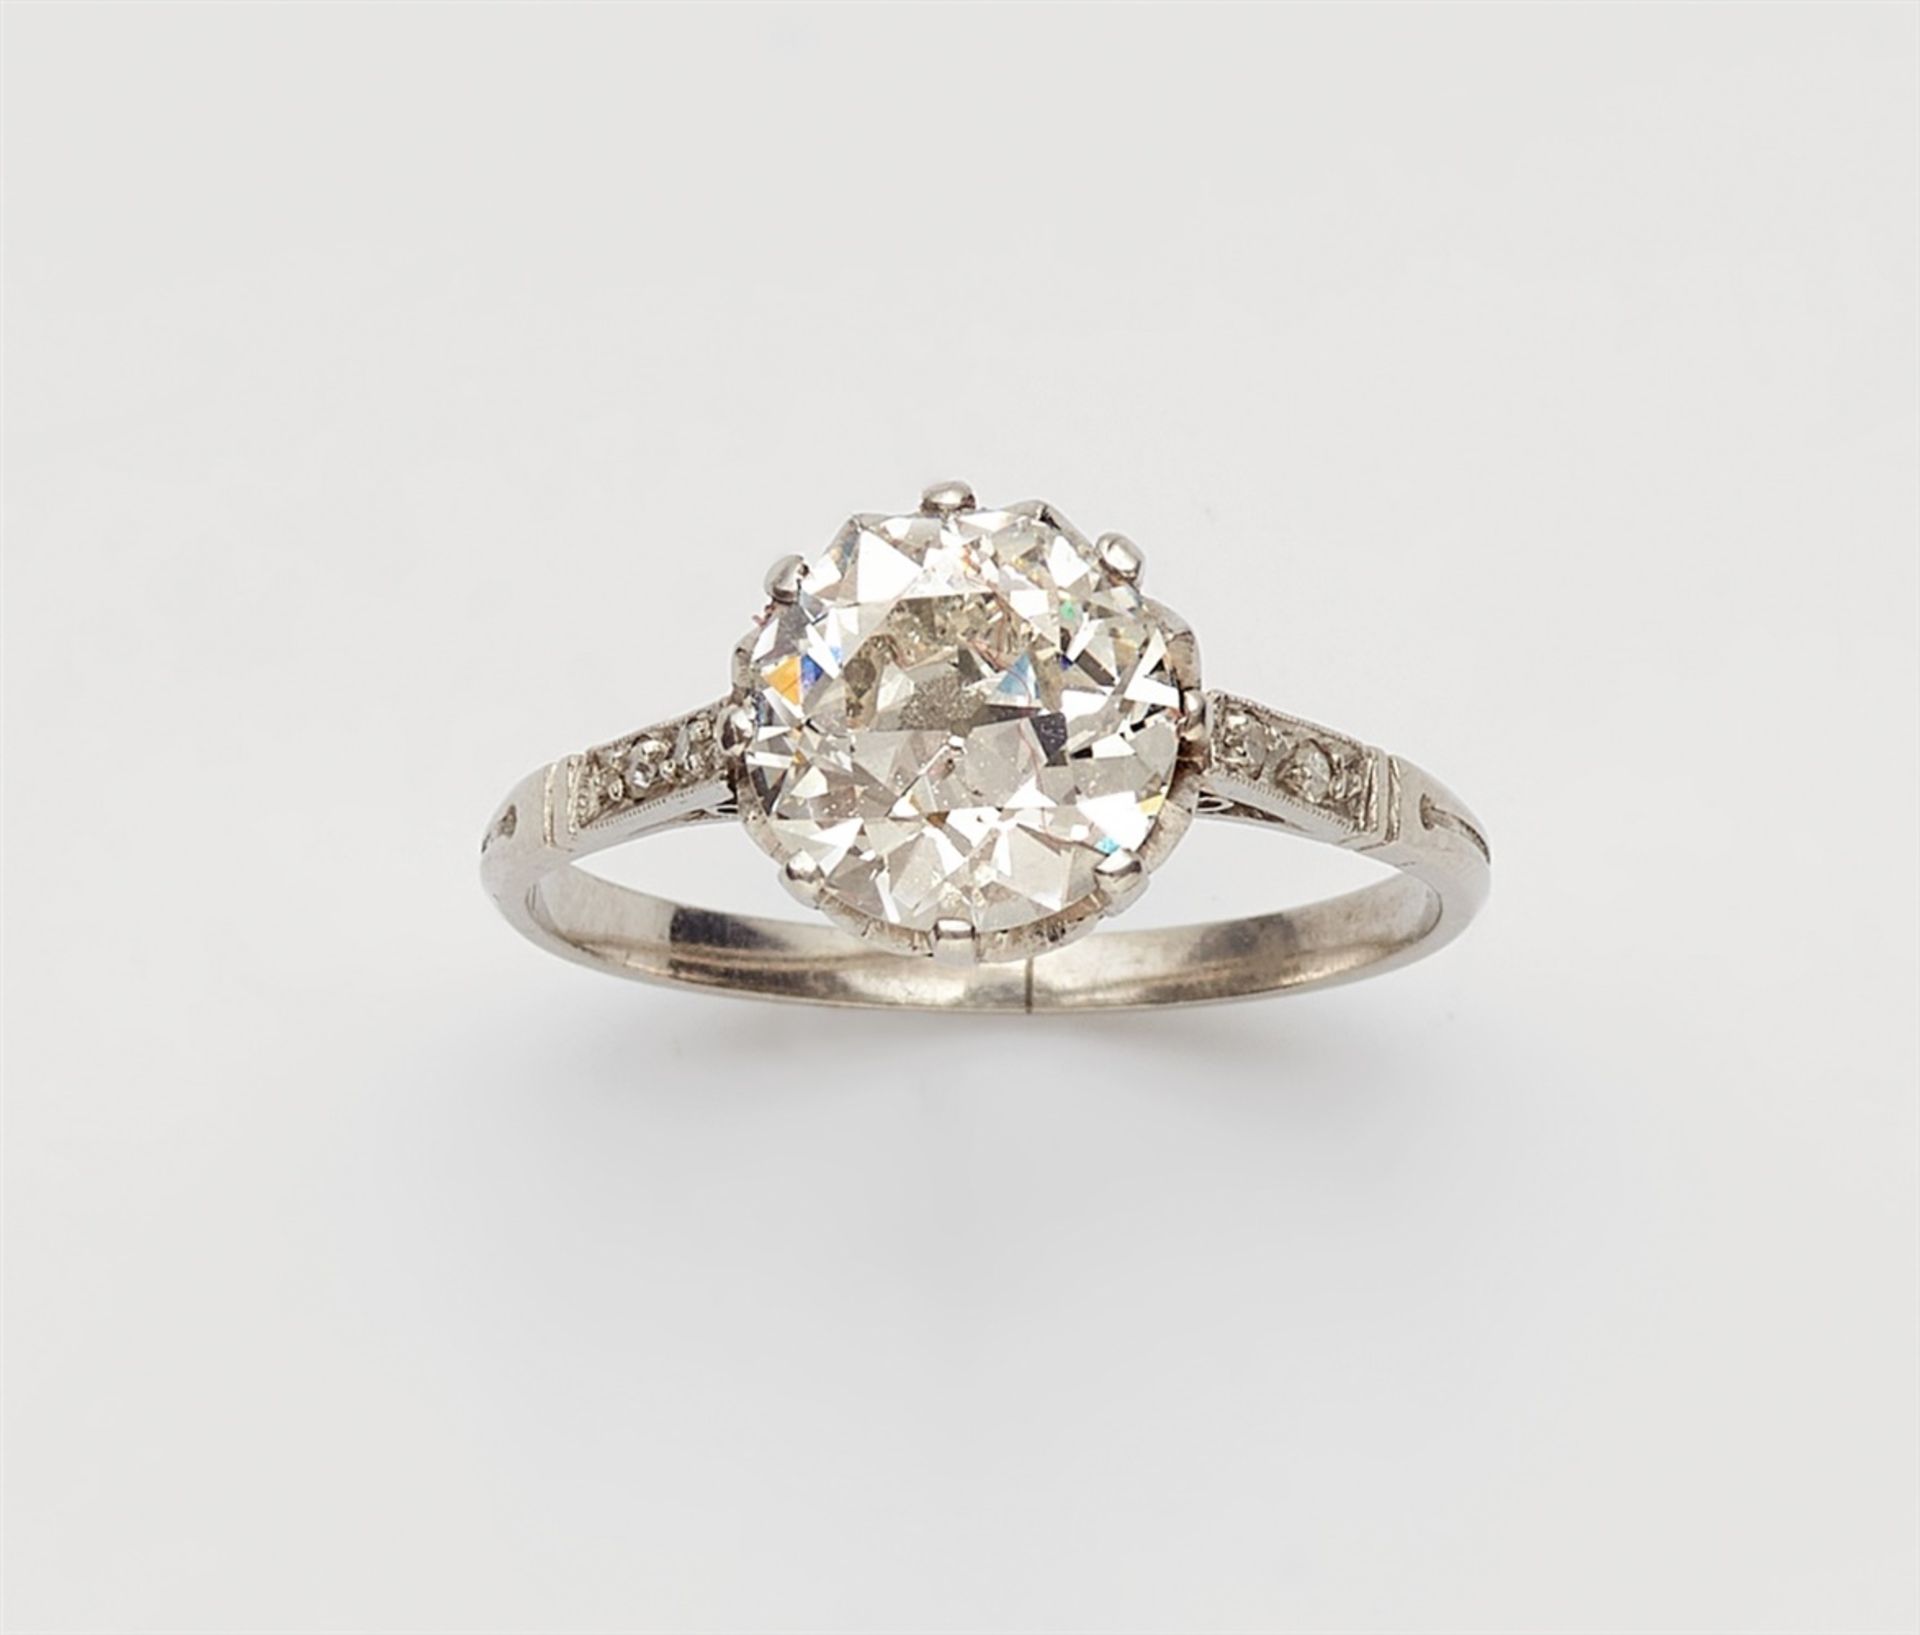 An 18k gold Belle Epoque ring with a diamond solitaireThe shoulders set with four 8/8-cut